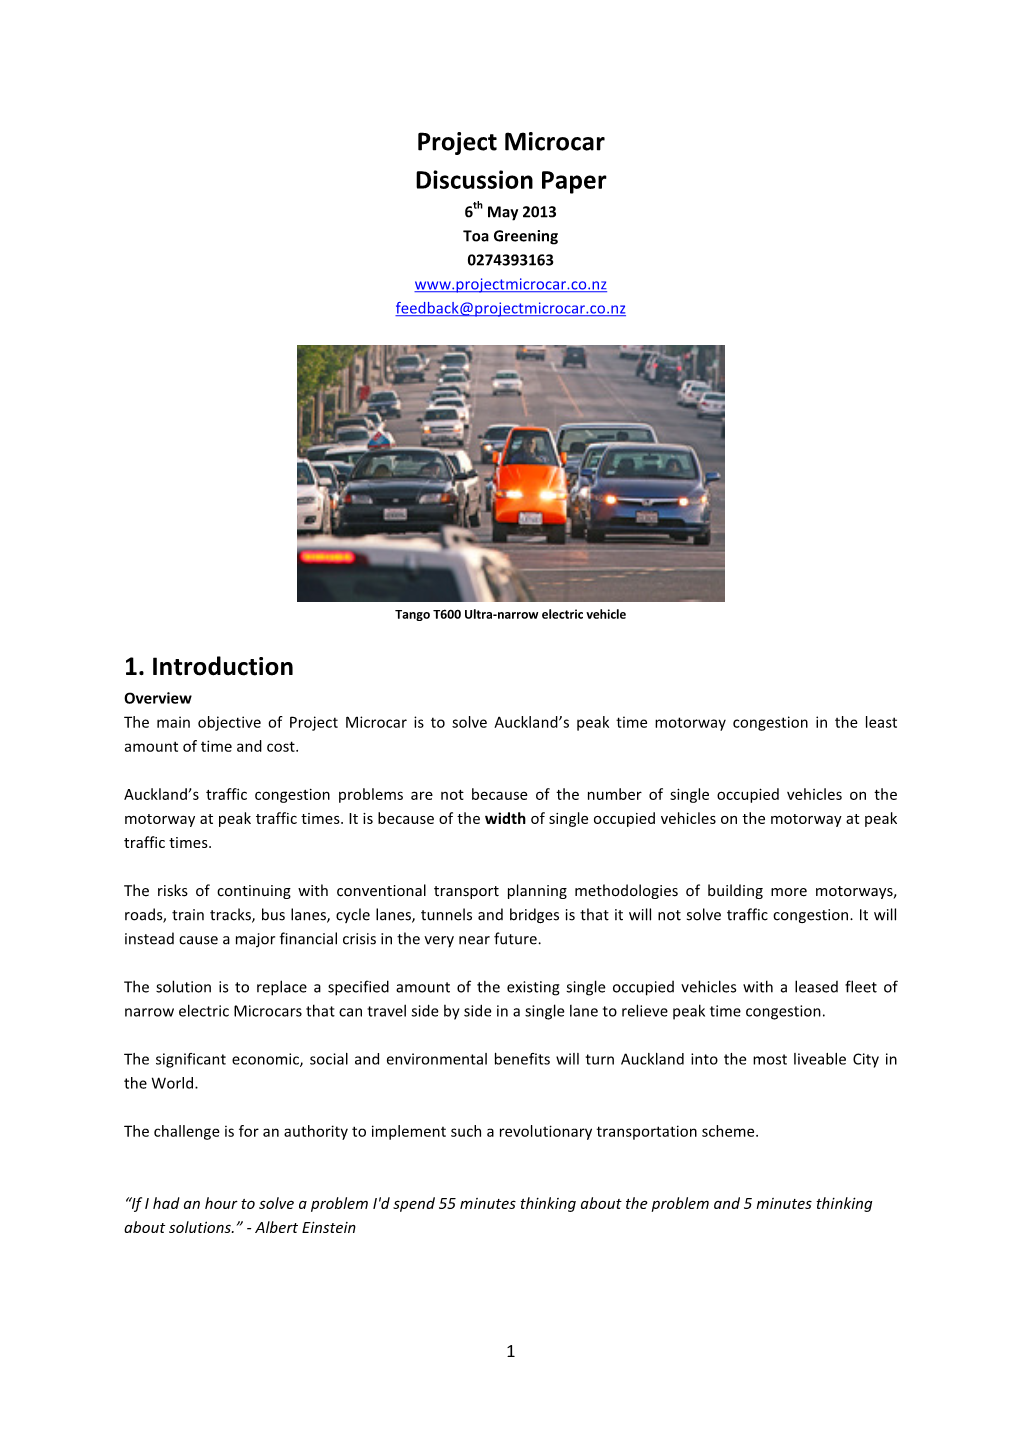 Project Microcar Discussion Paper 1. Introduction